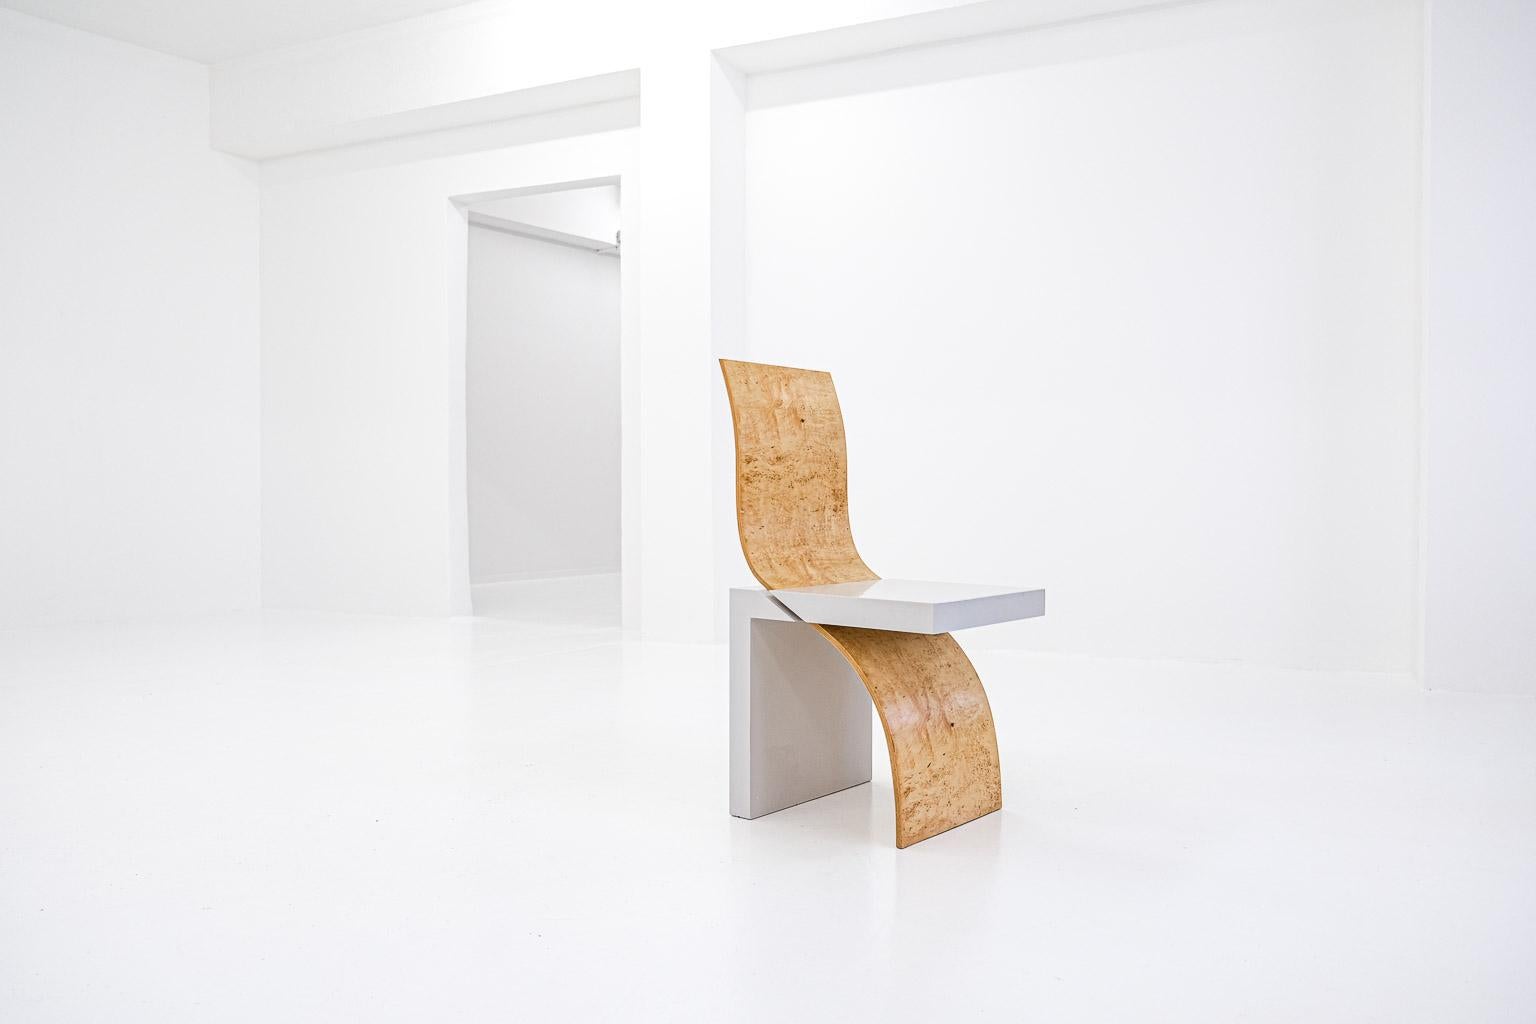  Post-Modern Object Chair Leda by Angela Oedekoven, no 26, limited edition of 50 For Sale 2